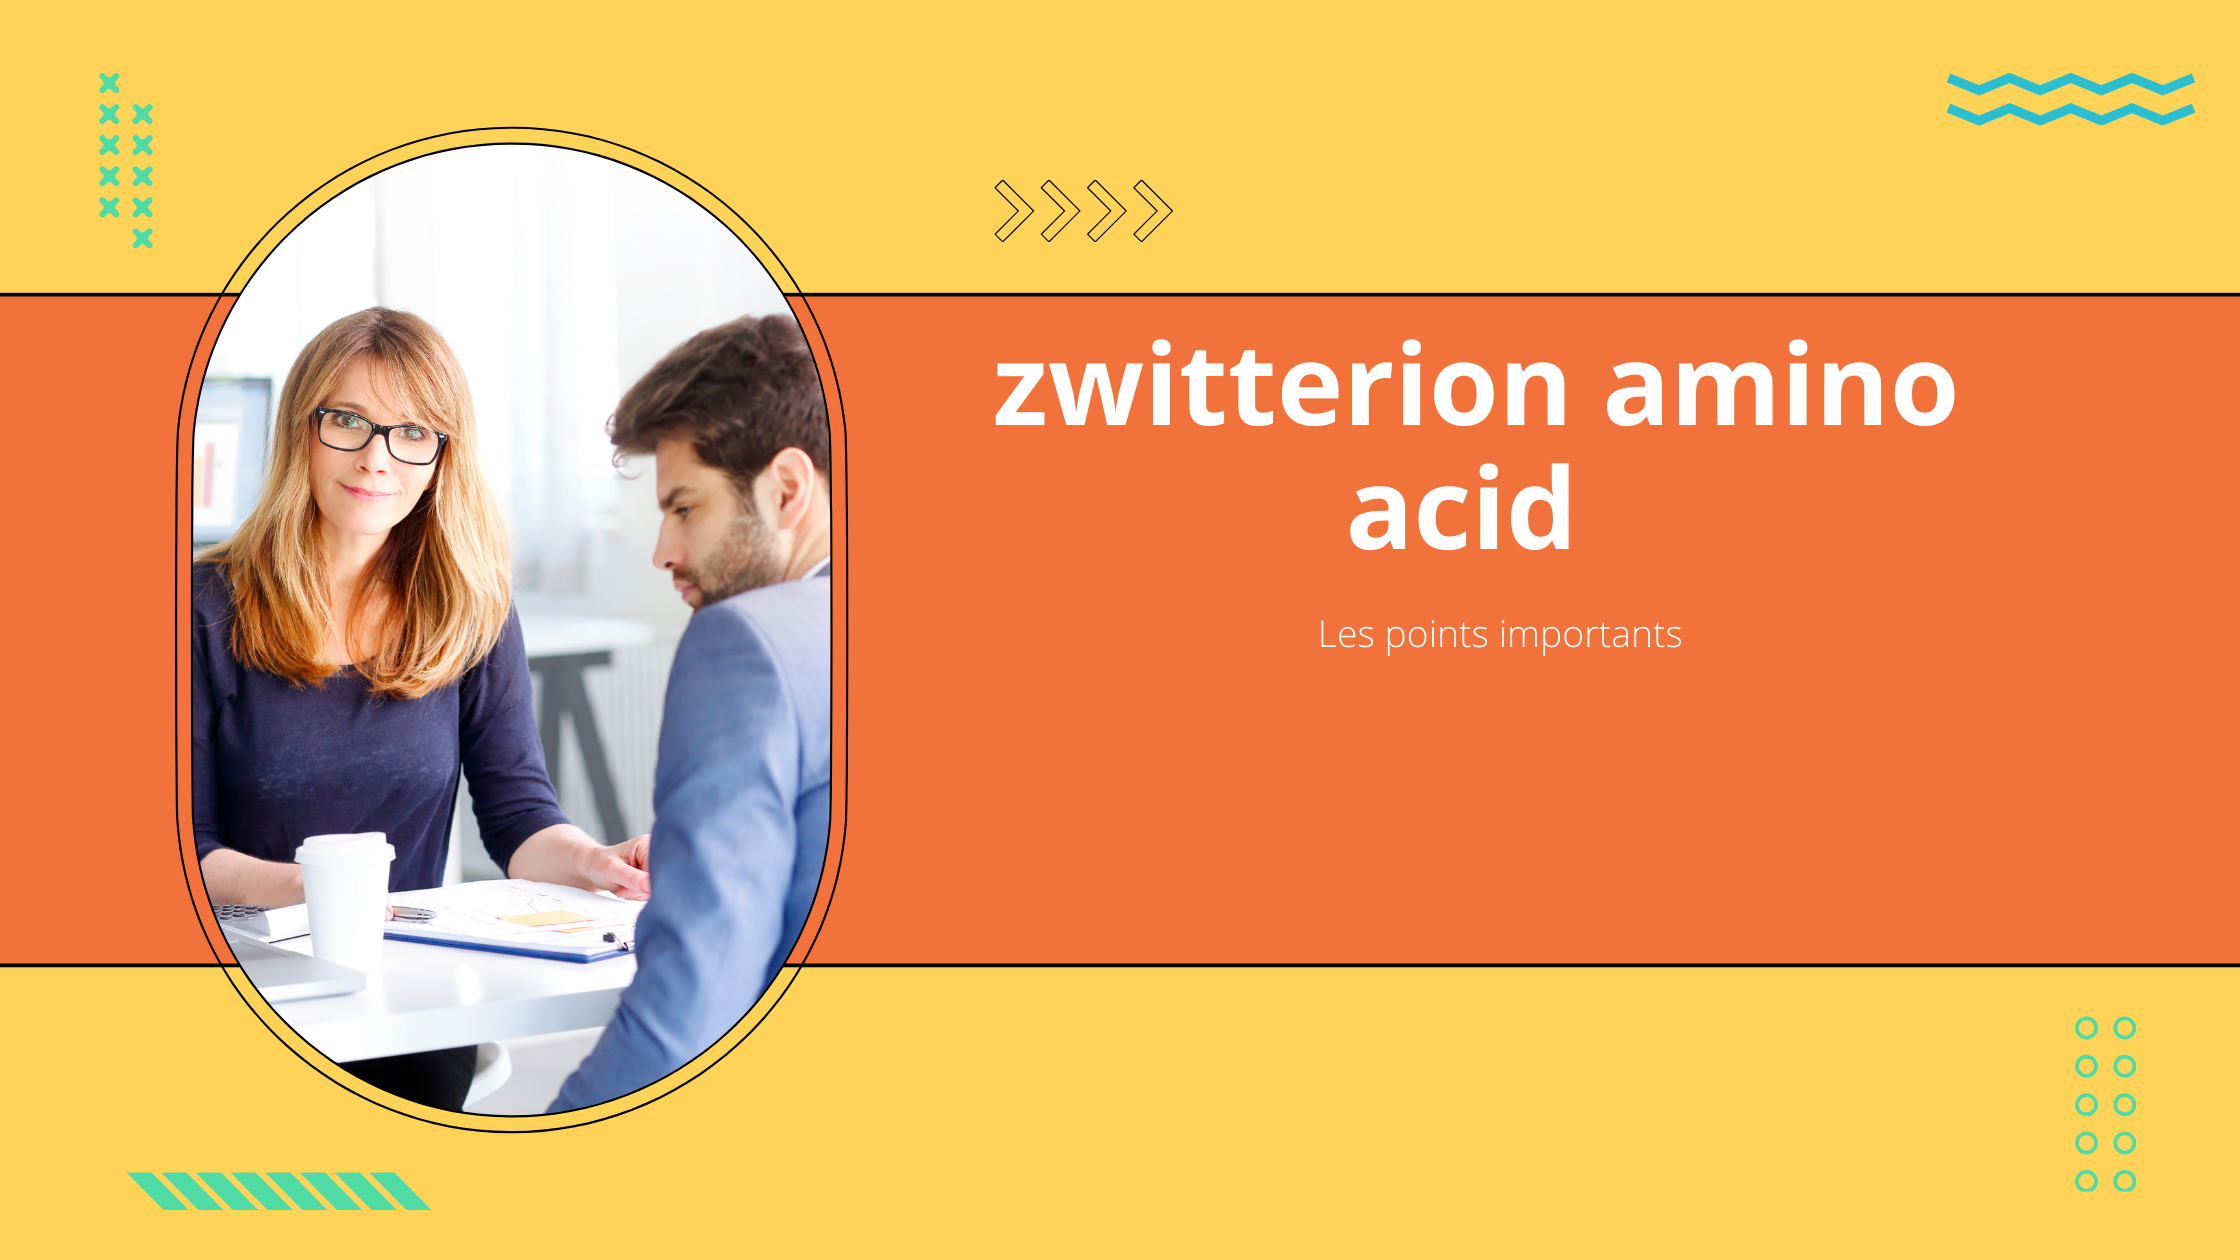 zwitterion amino acid | Les points importants